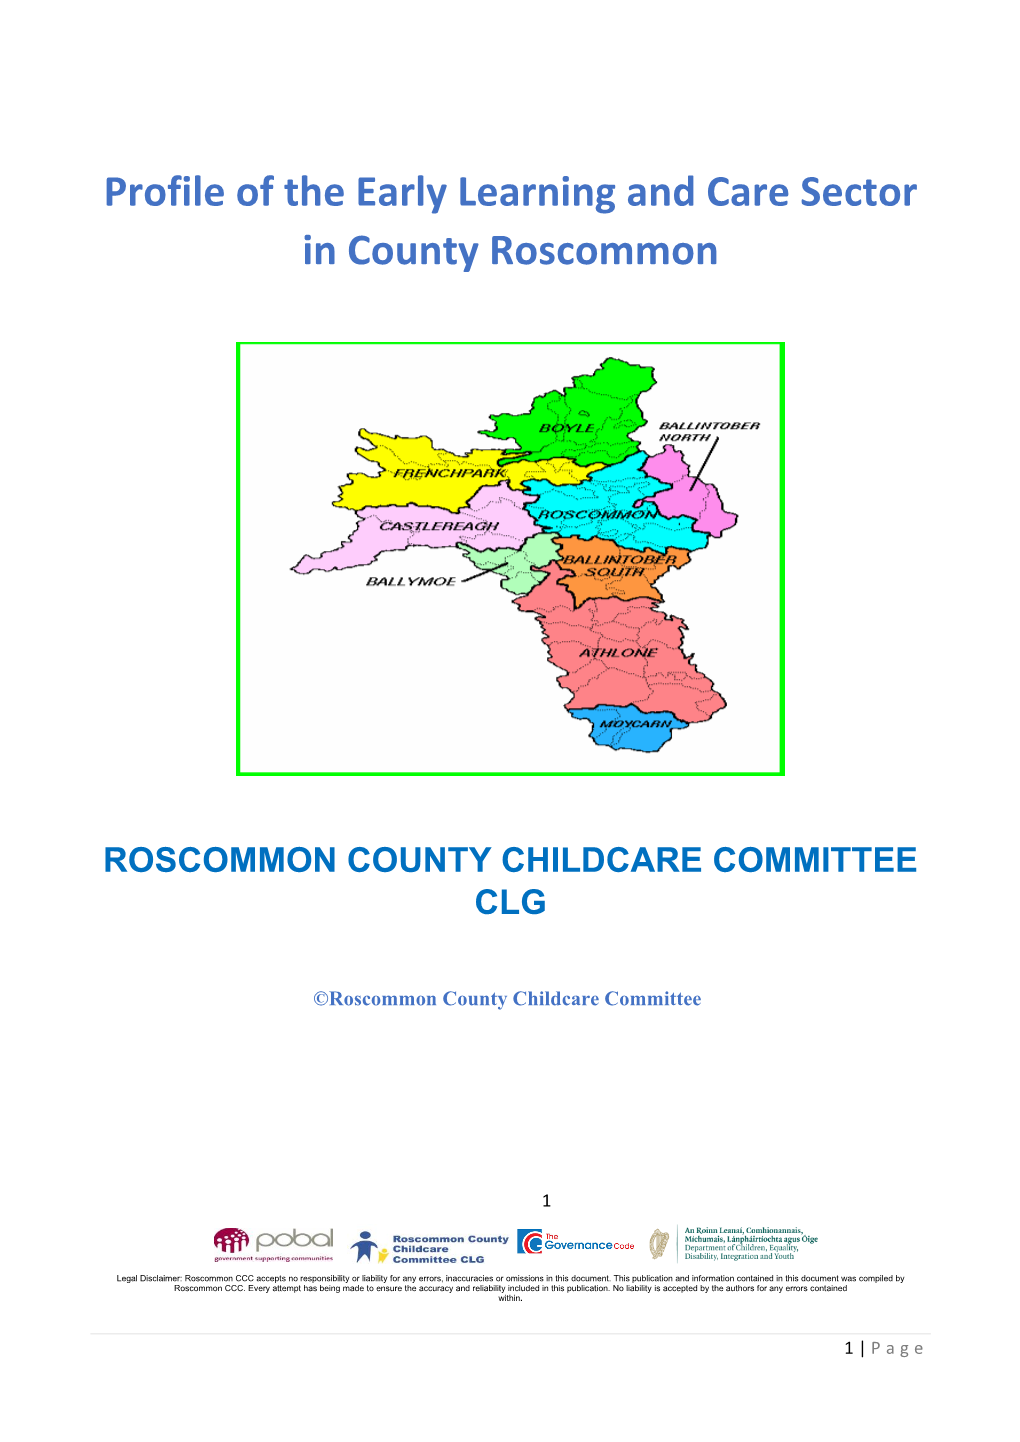 Profile of the Early Learning and Care Sector in County Roscommon